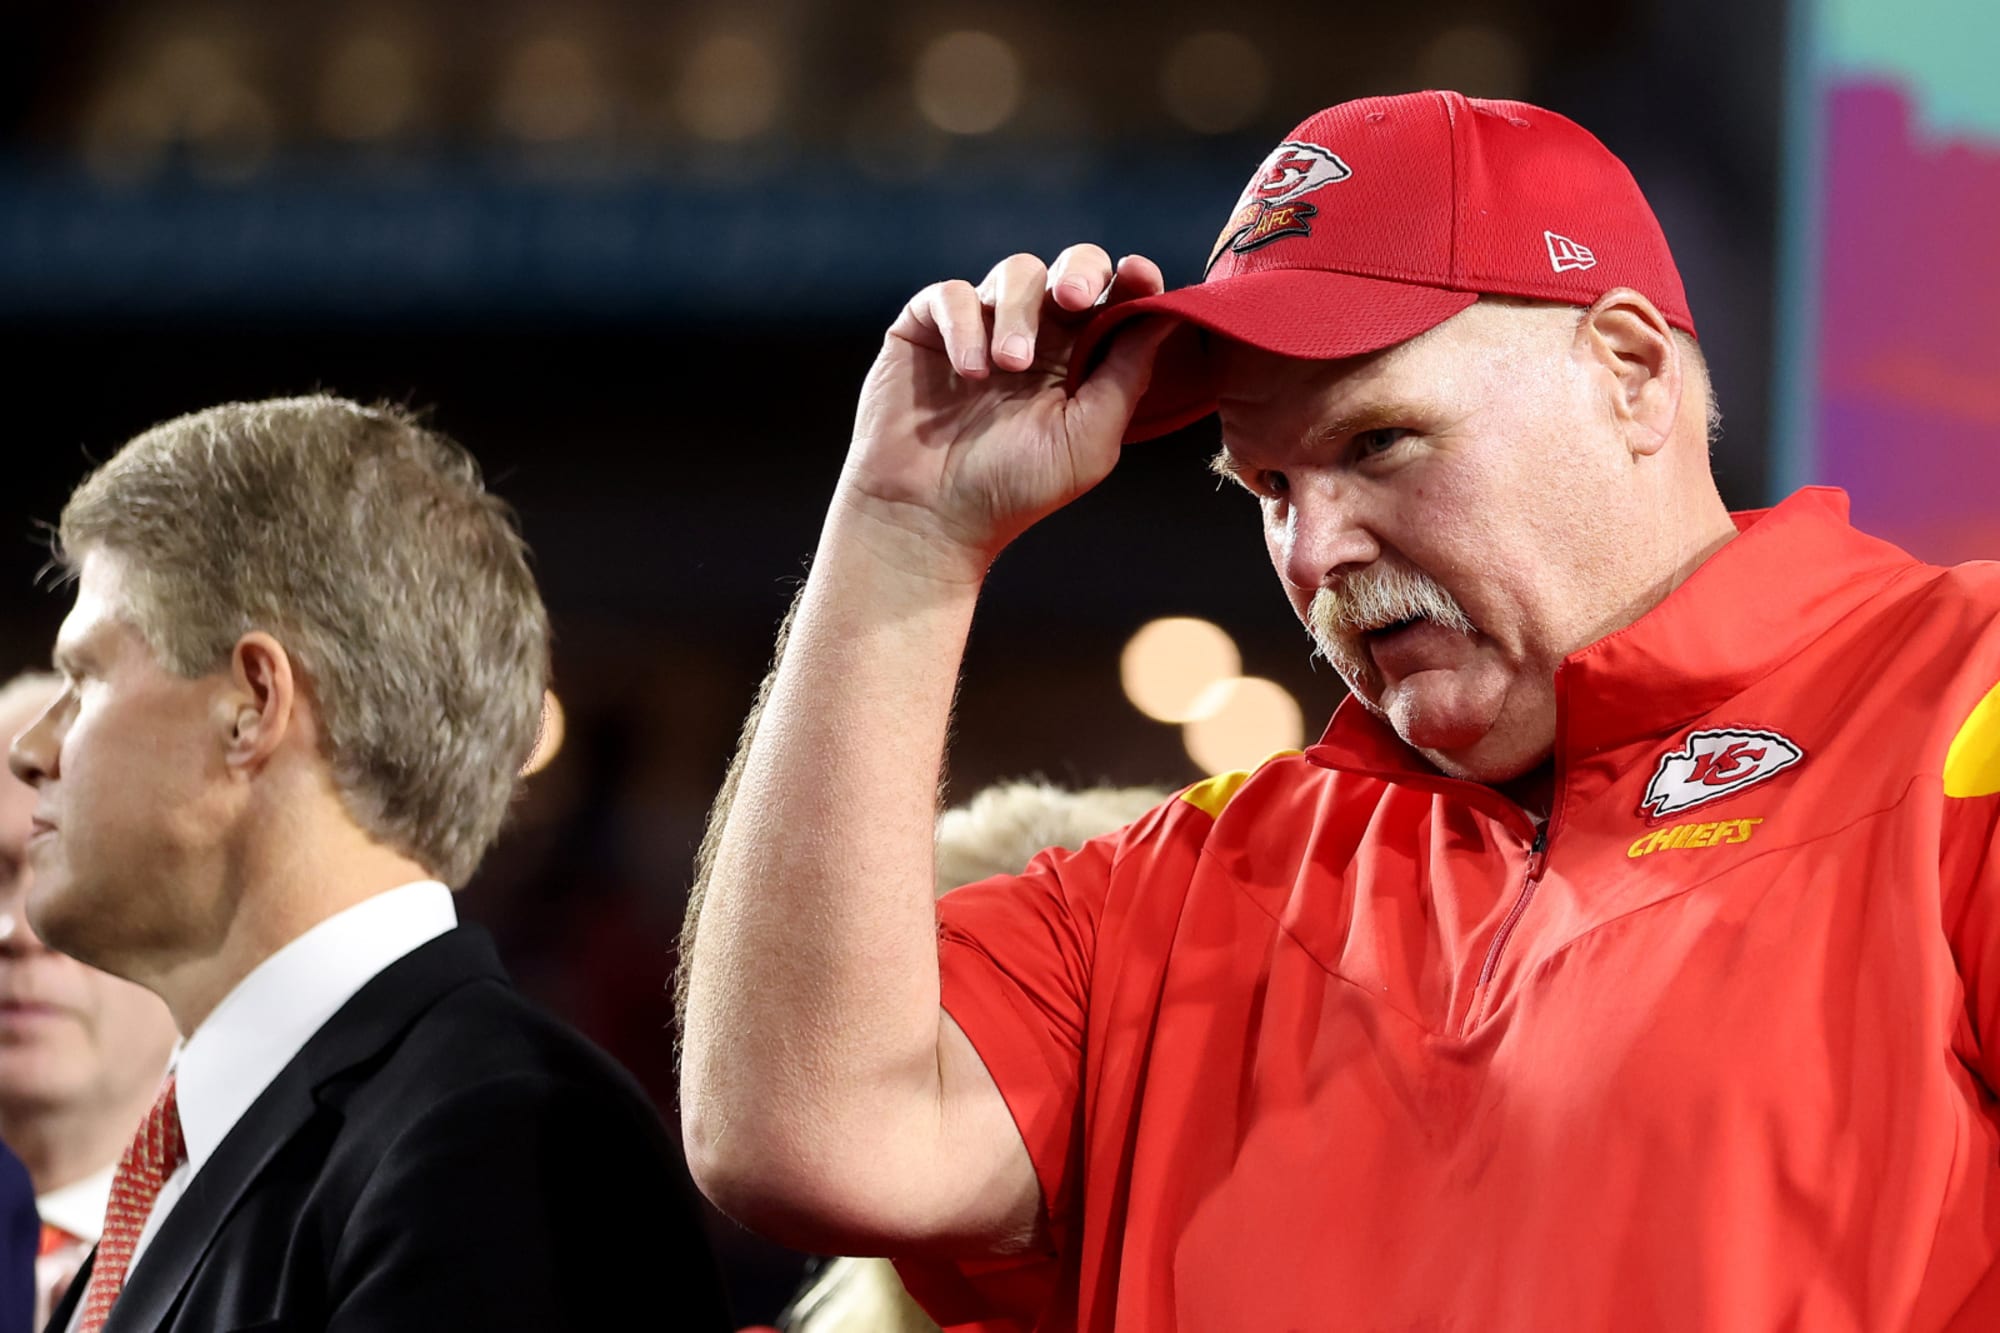 Terry Bradshaw in hot water over 'fat-shaming' Andy Reid